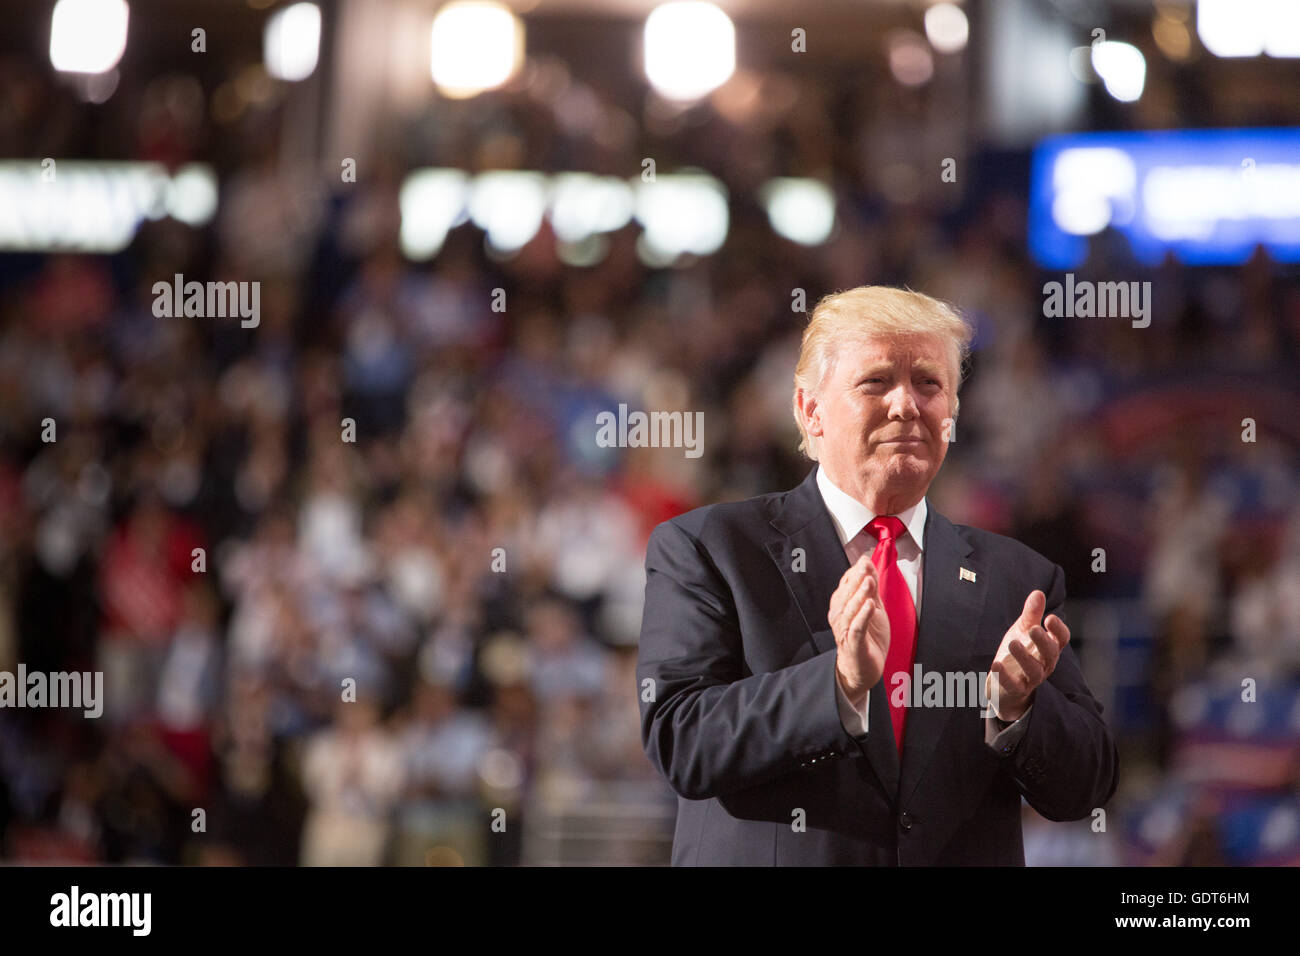 Cleveland, Ohio, USA; July 21, 2016: Donald J. Trump accepts his nomination to run for president at the Republican National Convention. (Philip Scalia/Alamy Live News) Stock Photo